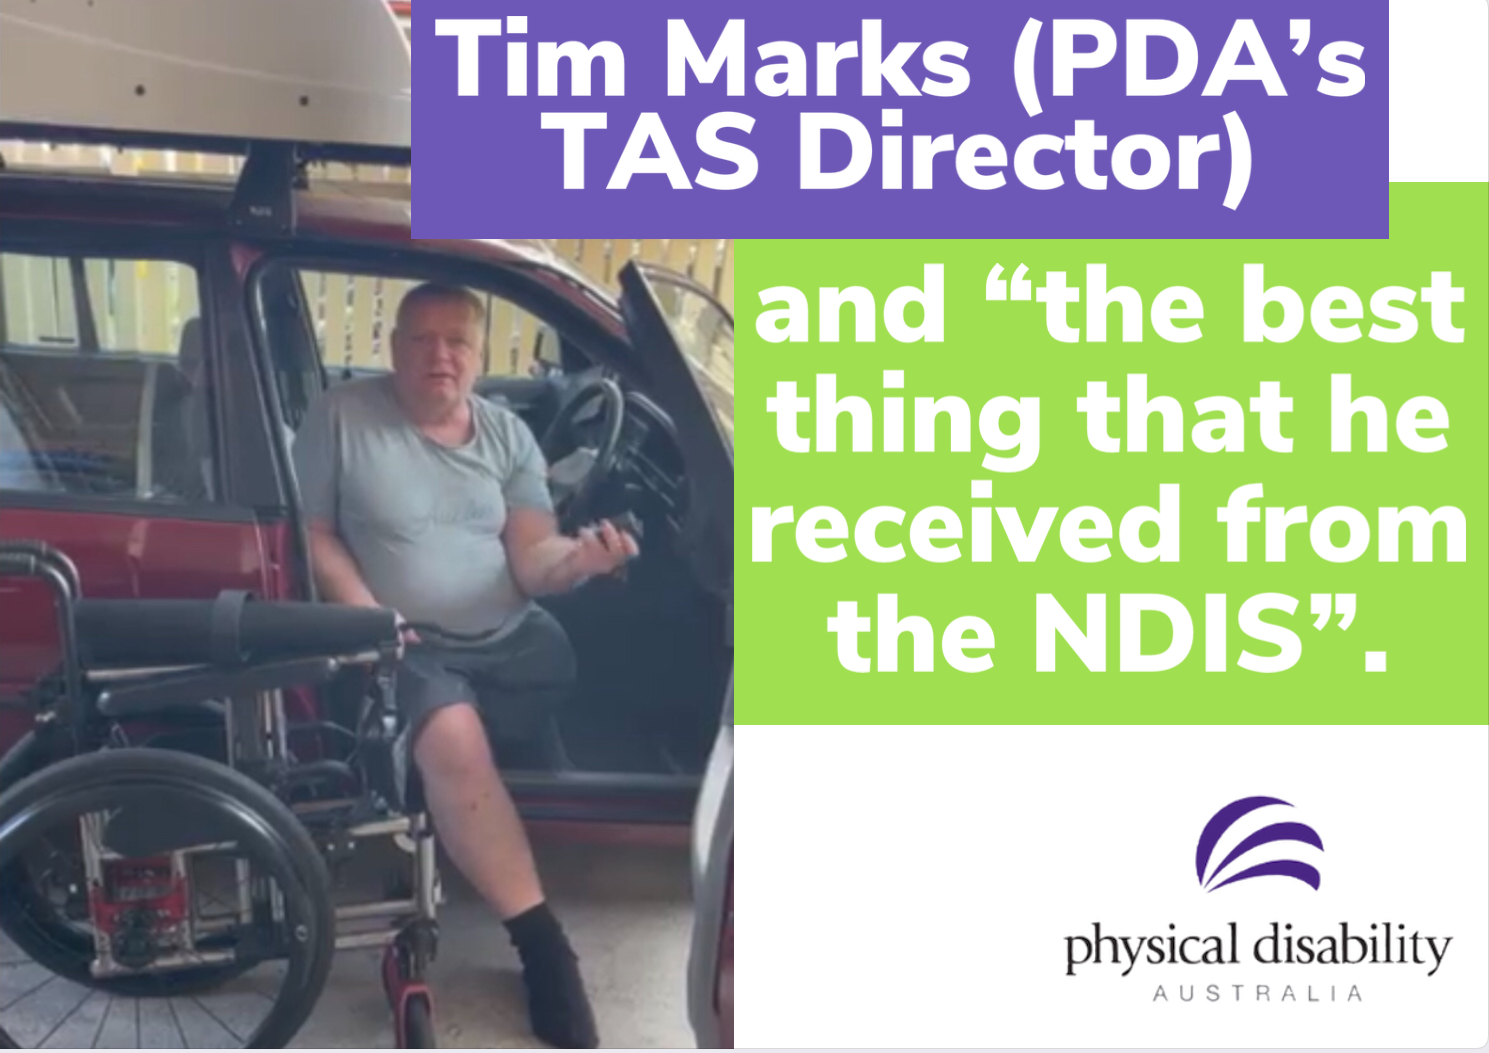 PDA’s Tasmanian Director, Tim Marks, showcases “the best thing he received from the NDIS.”